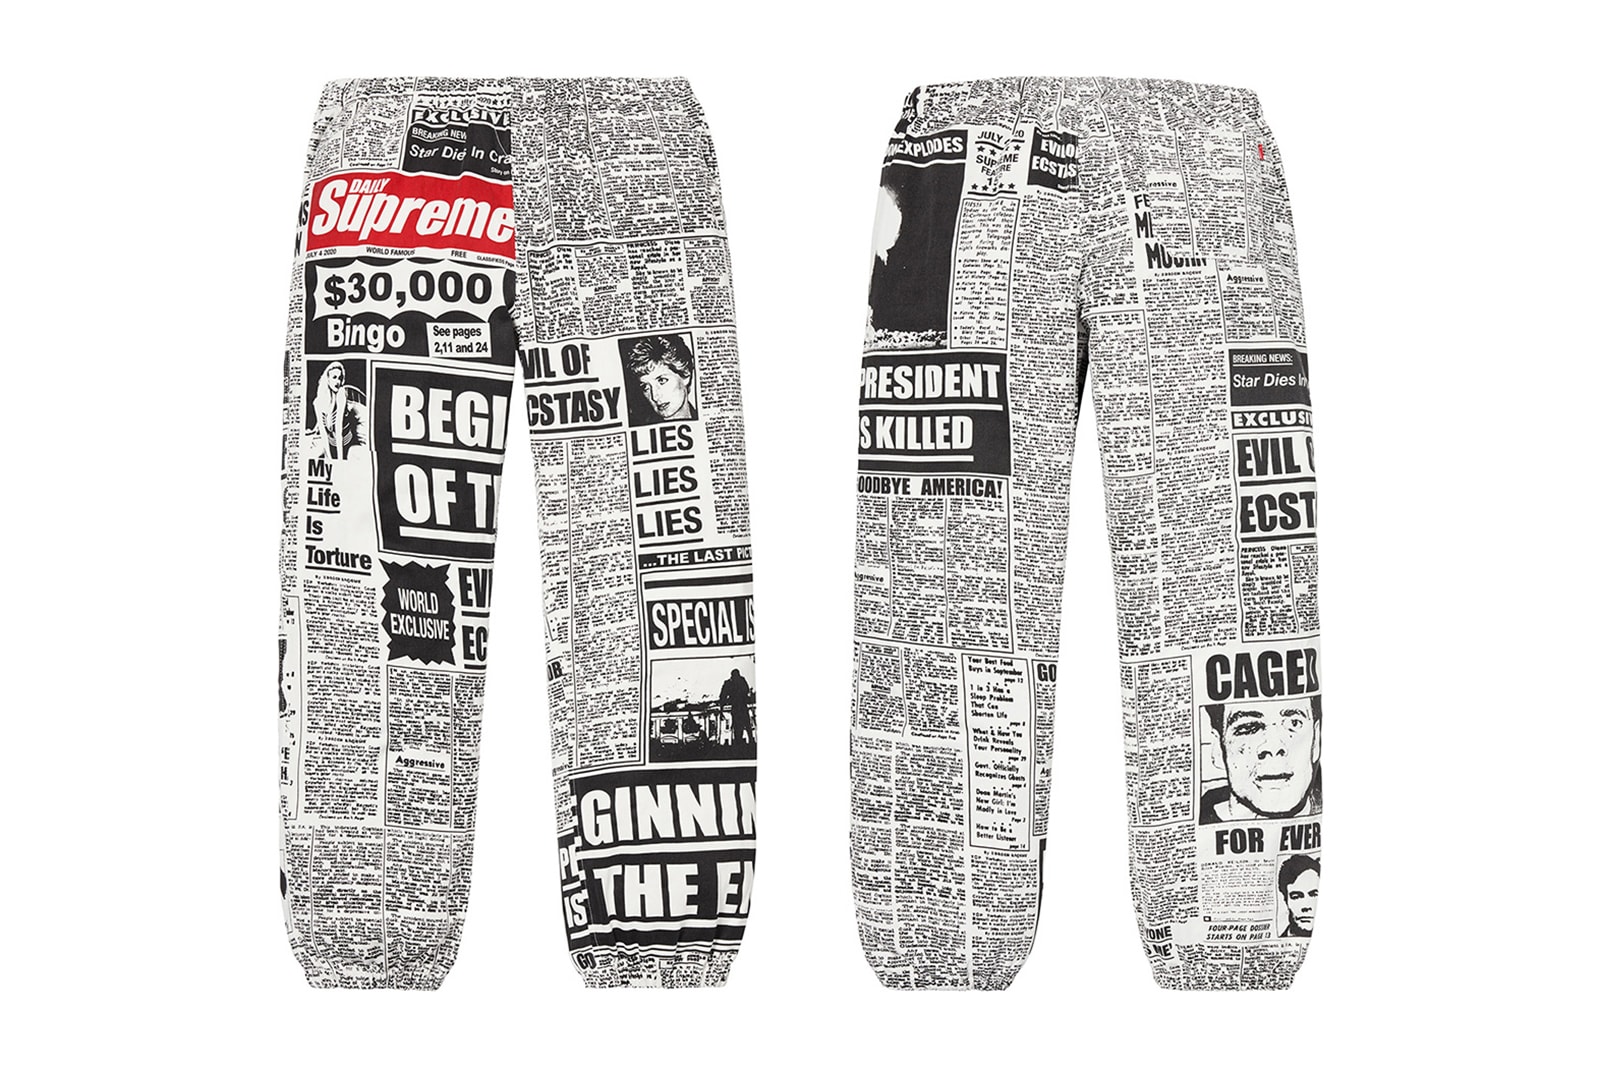 Supreme Fall/Winter 2018 Pants Trousers Sweatpants Camo Jeans Denim Track Split Jewel Newspaper Jesus Mary Shorts Release Details Information First Look News